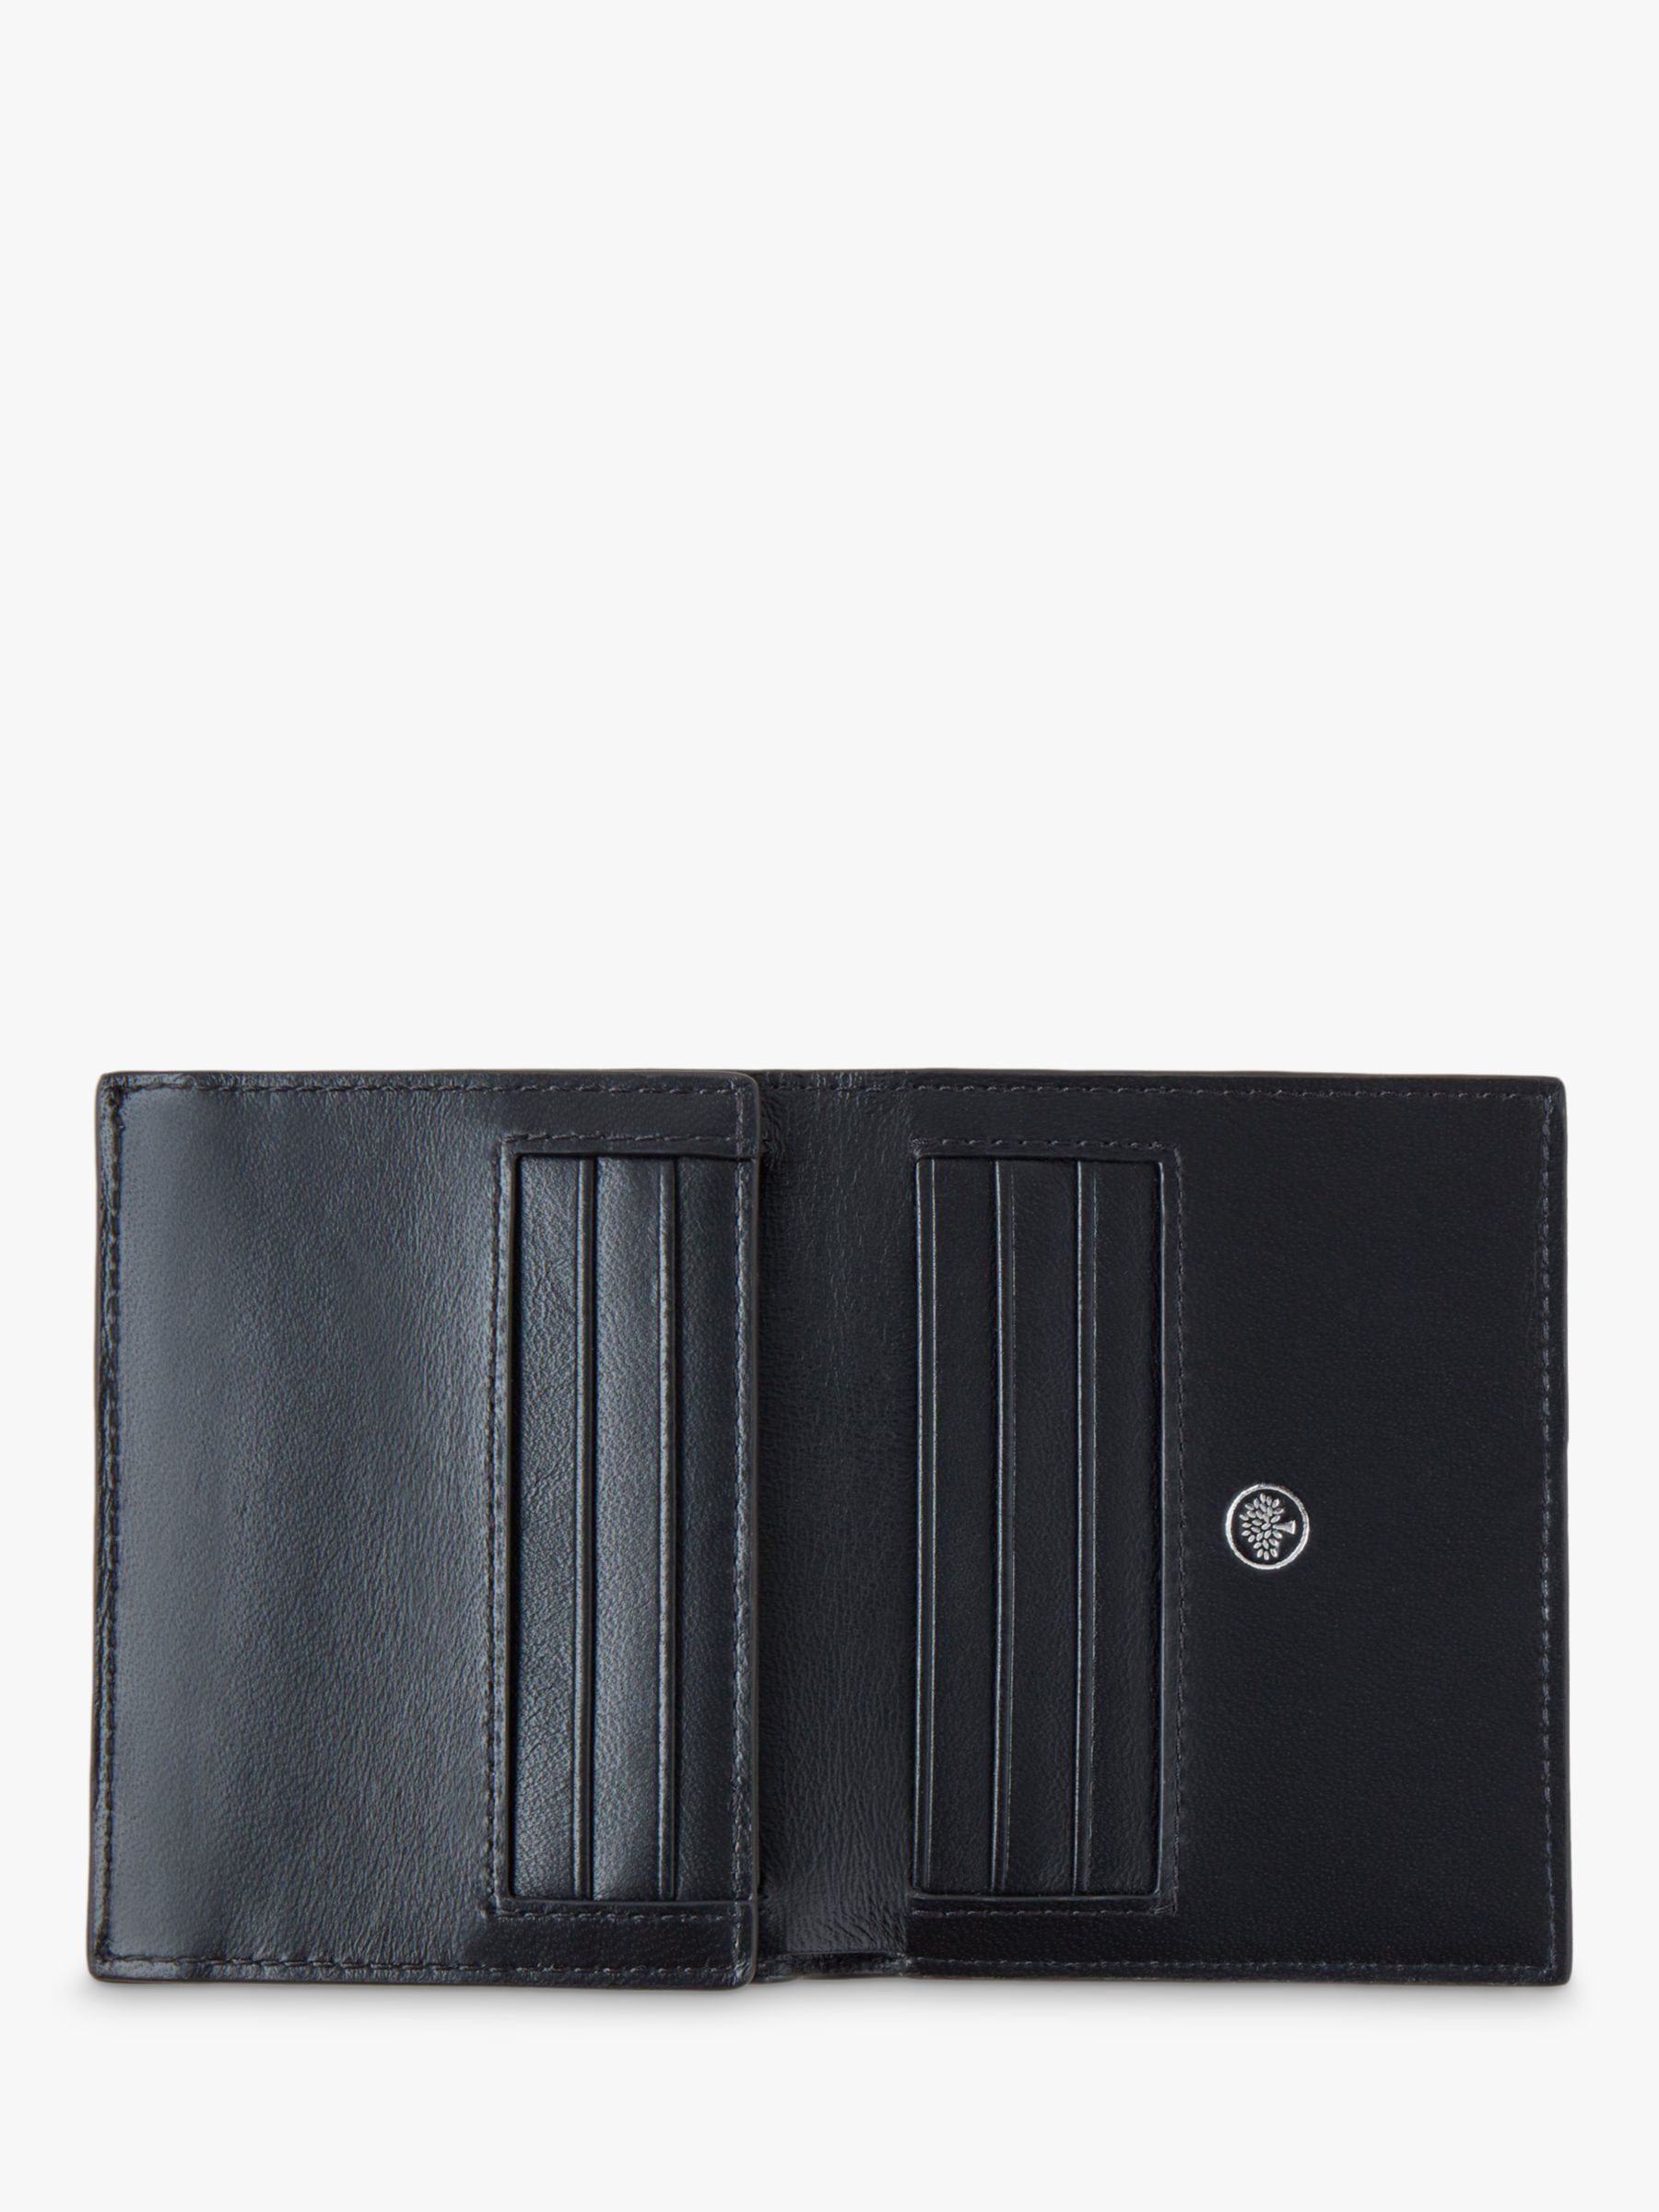 Mulberry Heavy Grained Leather Trifold Wallet, Uniform at John Lewis ...